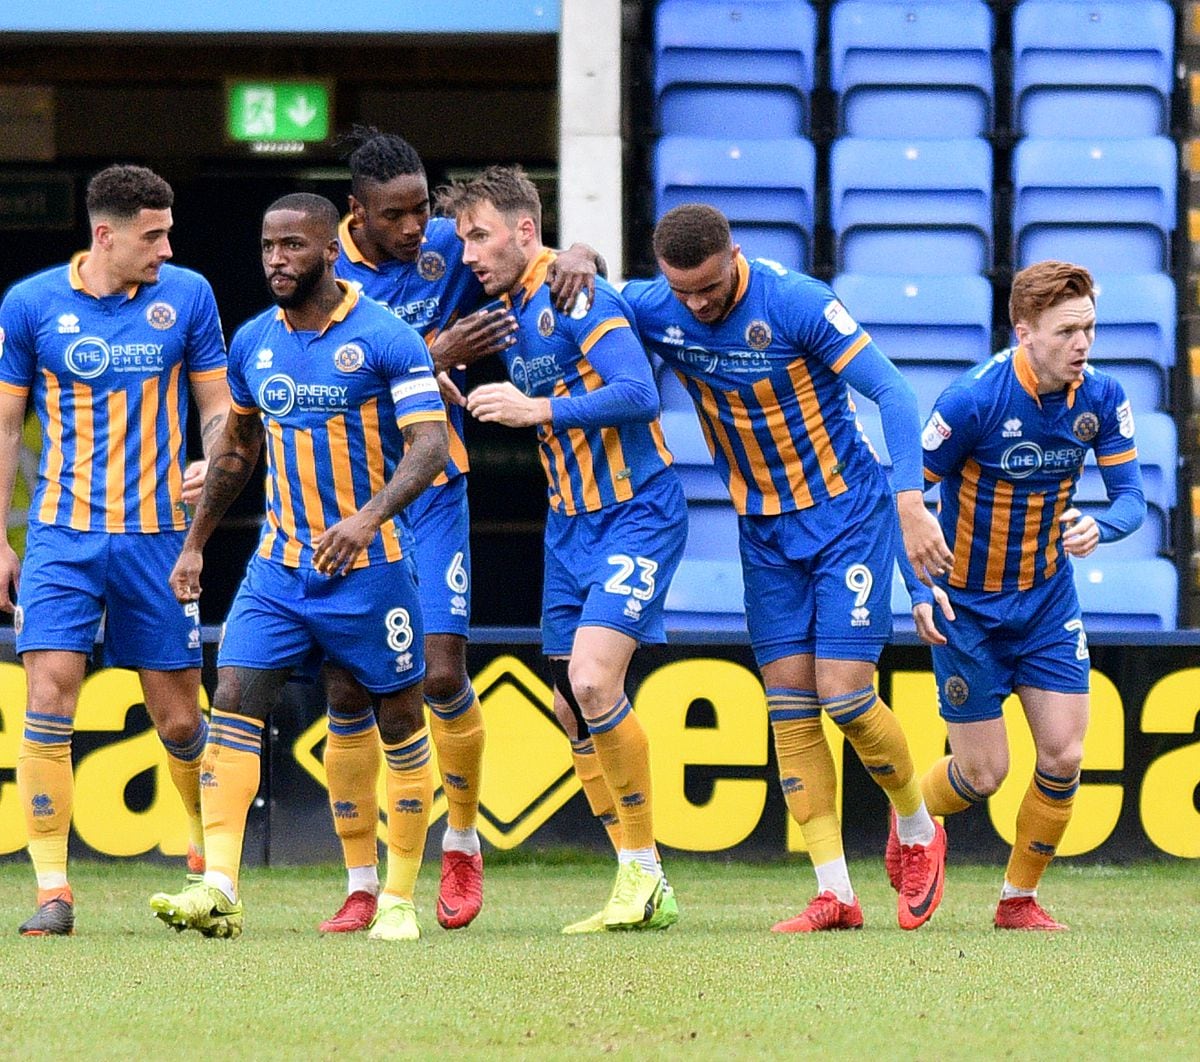 Shrewsbury Town 2 Walsall 0 - Report and pictures | Shropshire Star